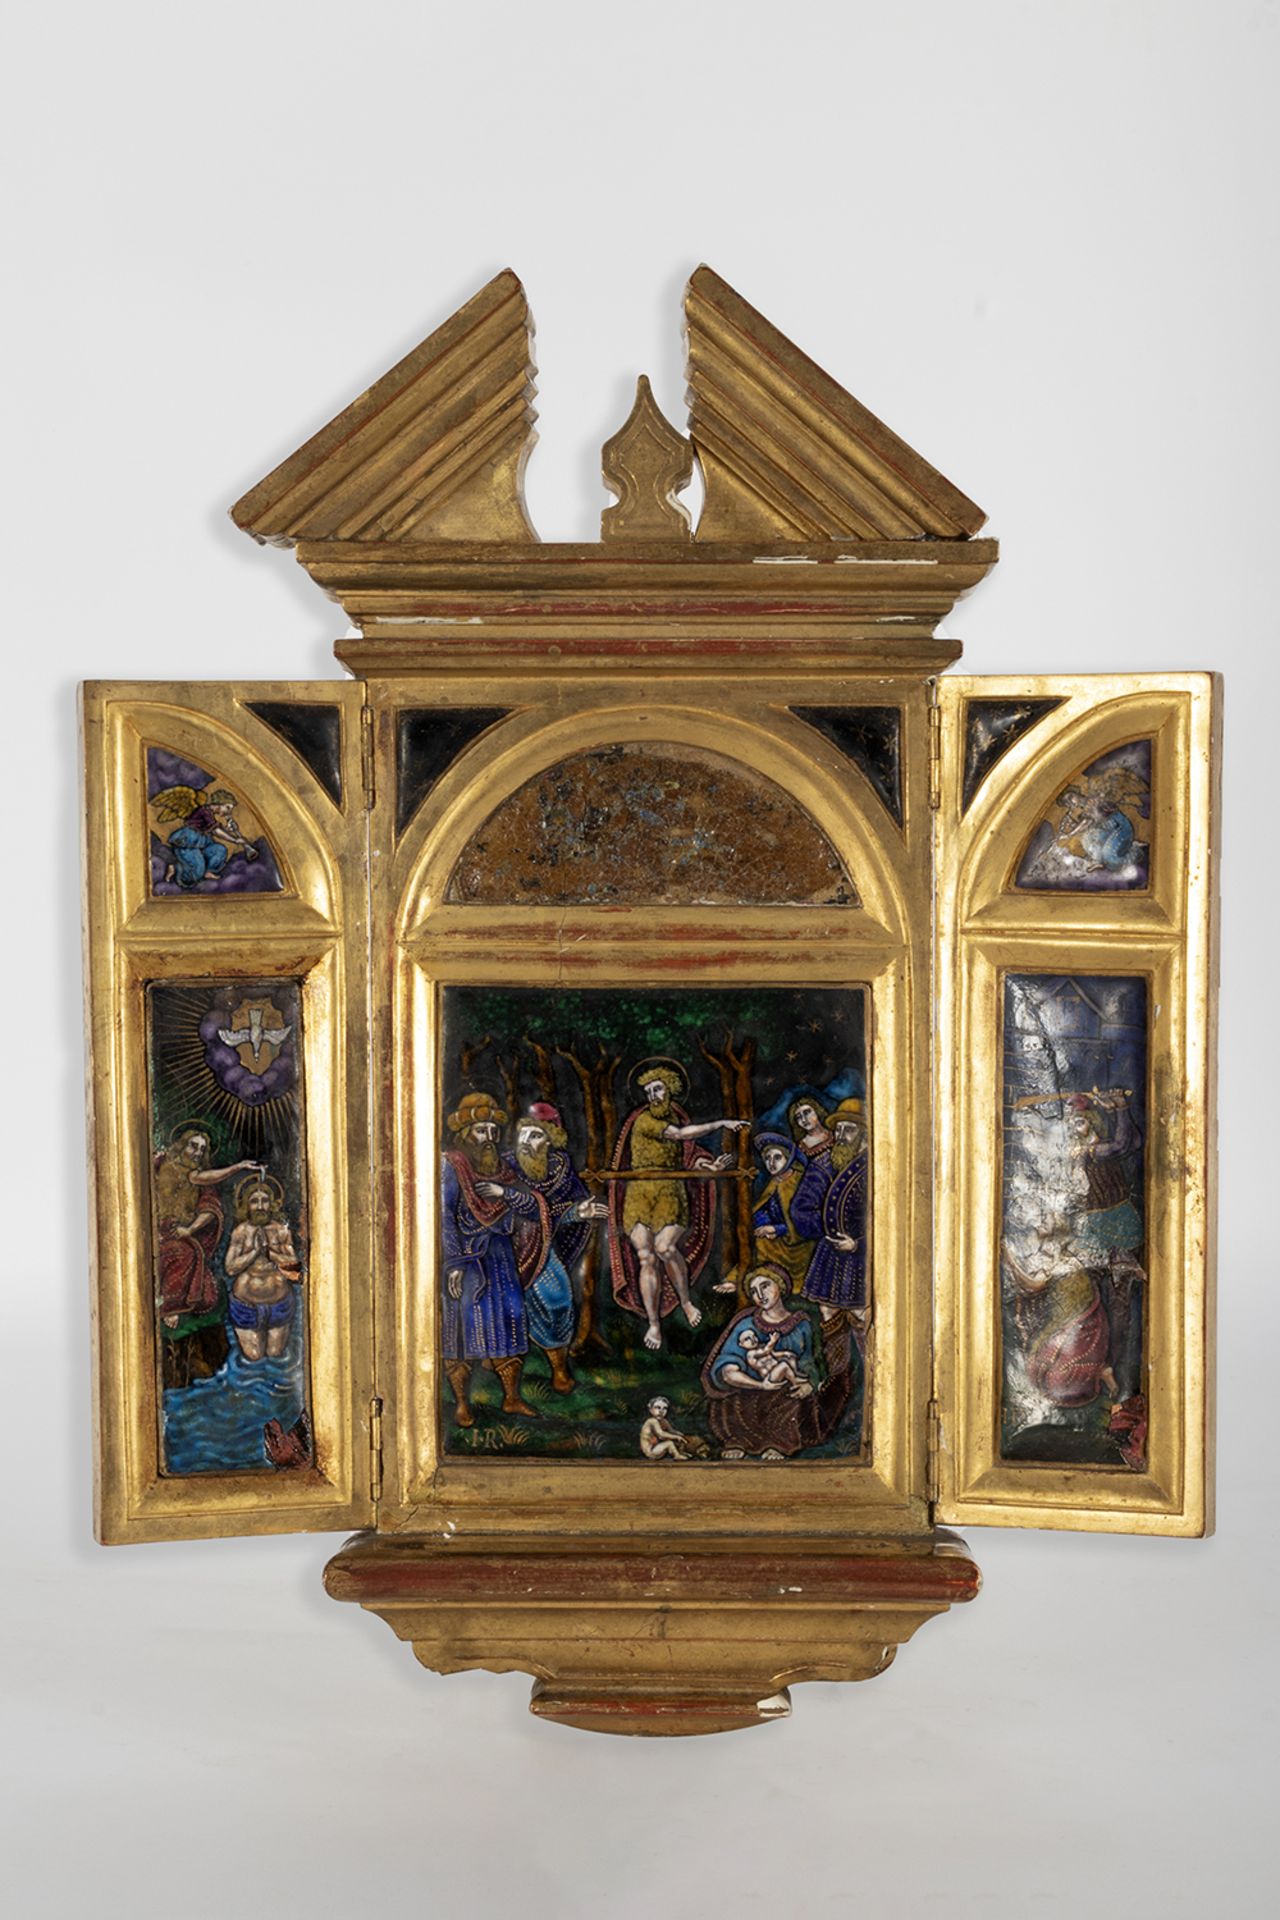 Triptych of architectural structure in gilded wood and enamel on copper with representation of scene